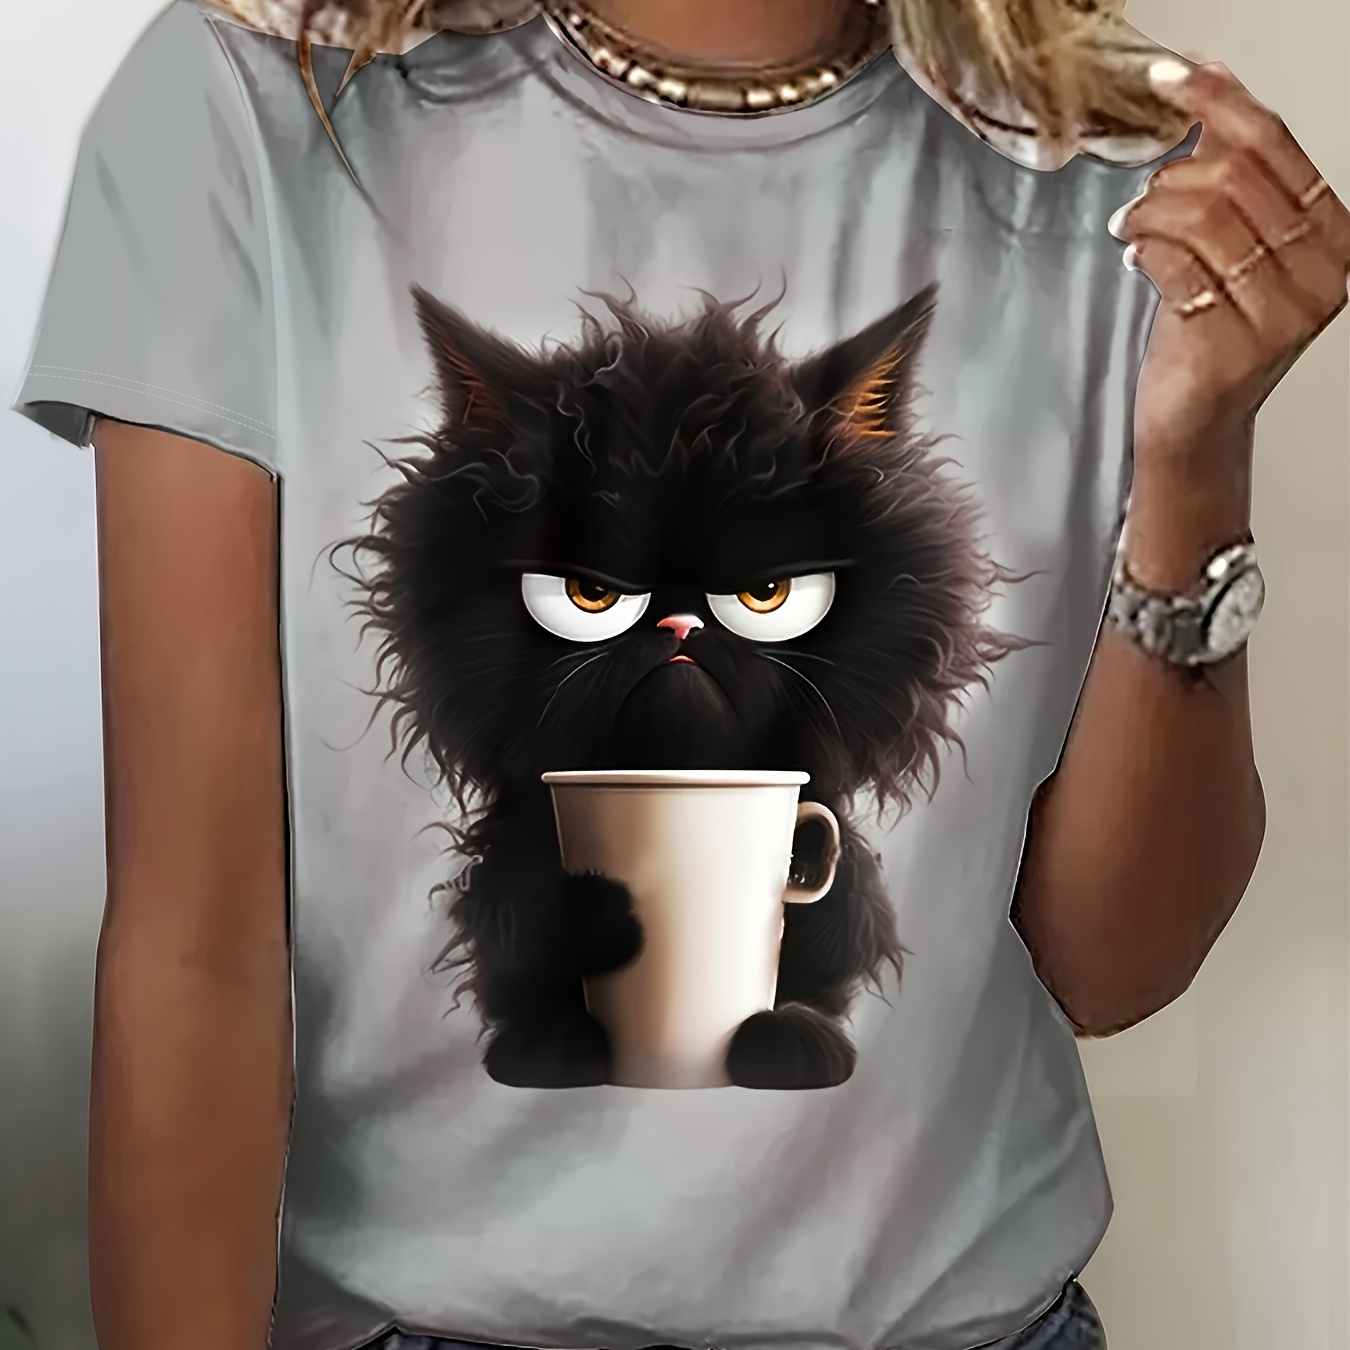 

Cat Print Crew Neck T-shirt, Casual Short Sleeve Top For Spring & Summer, Women's Clothing